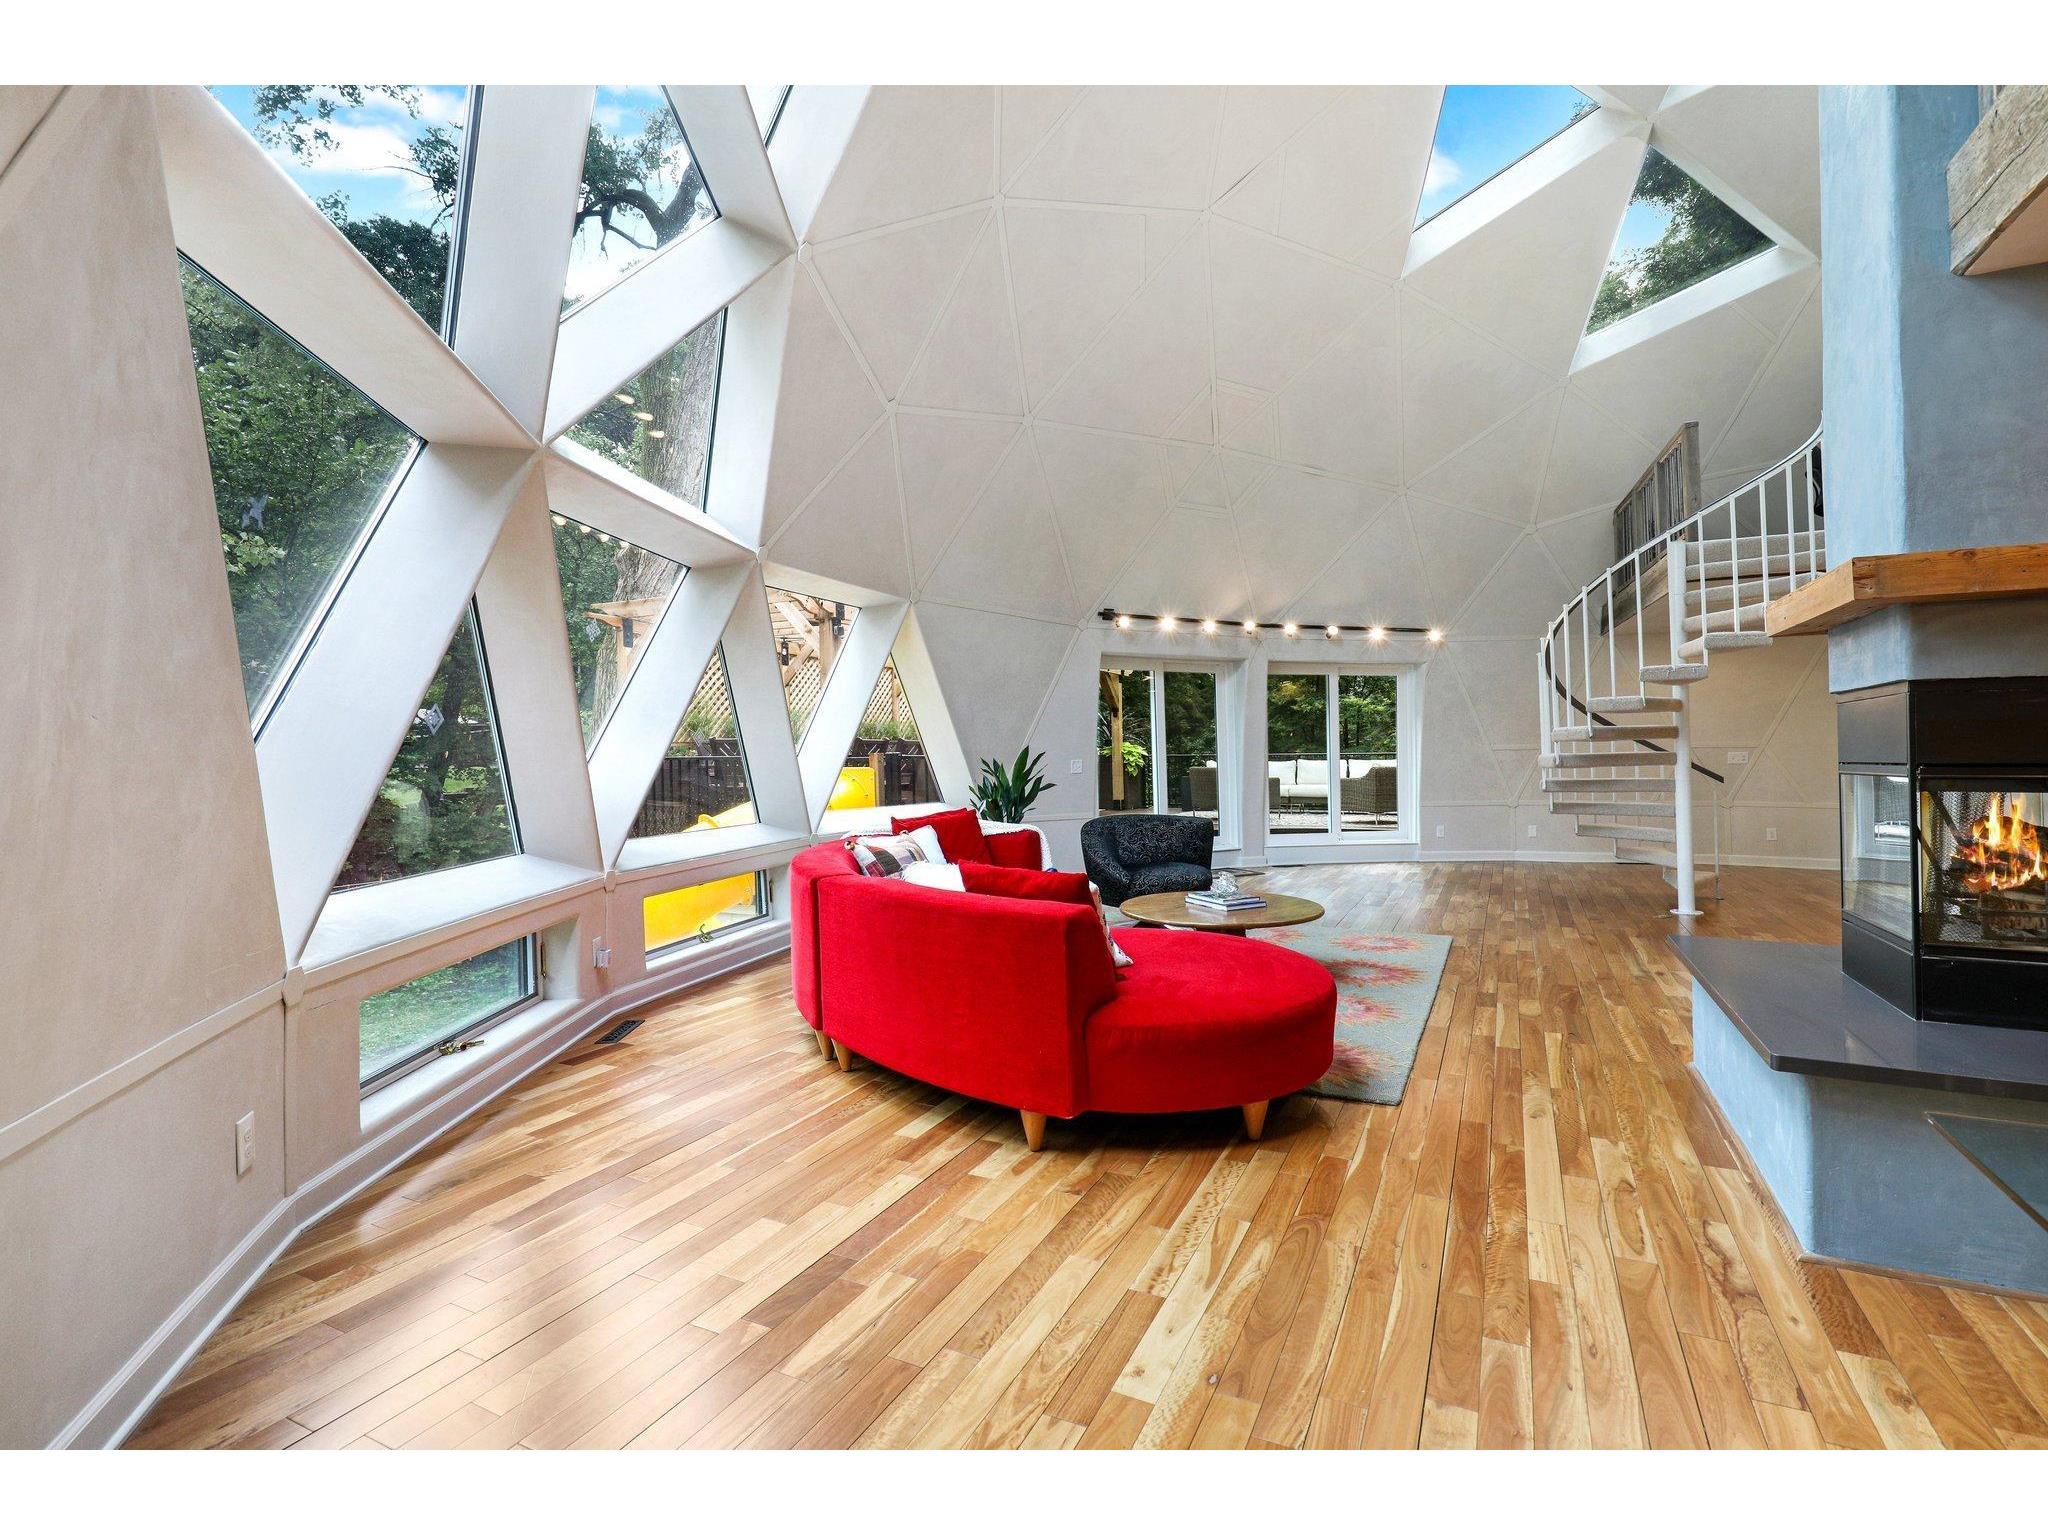 Contemporary living room of the Double Dome home